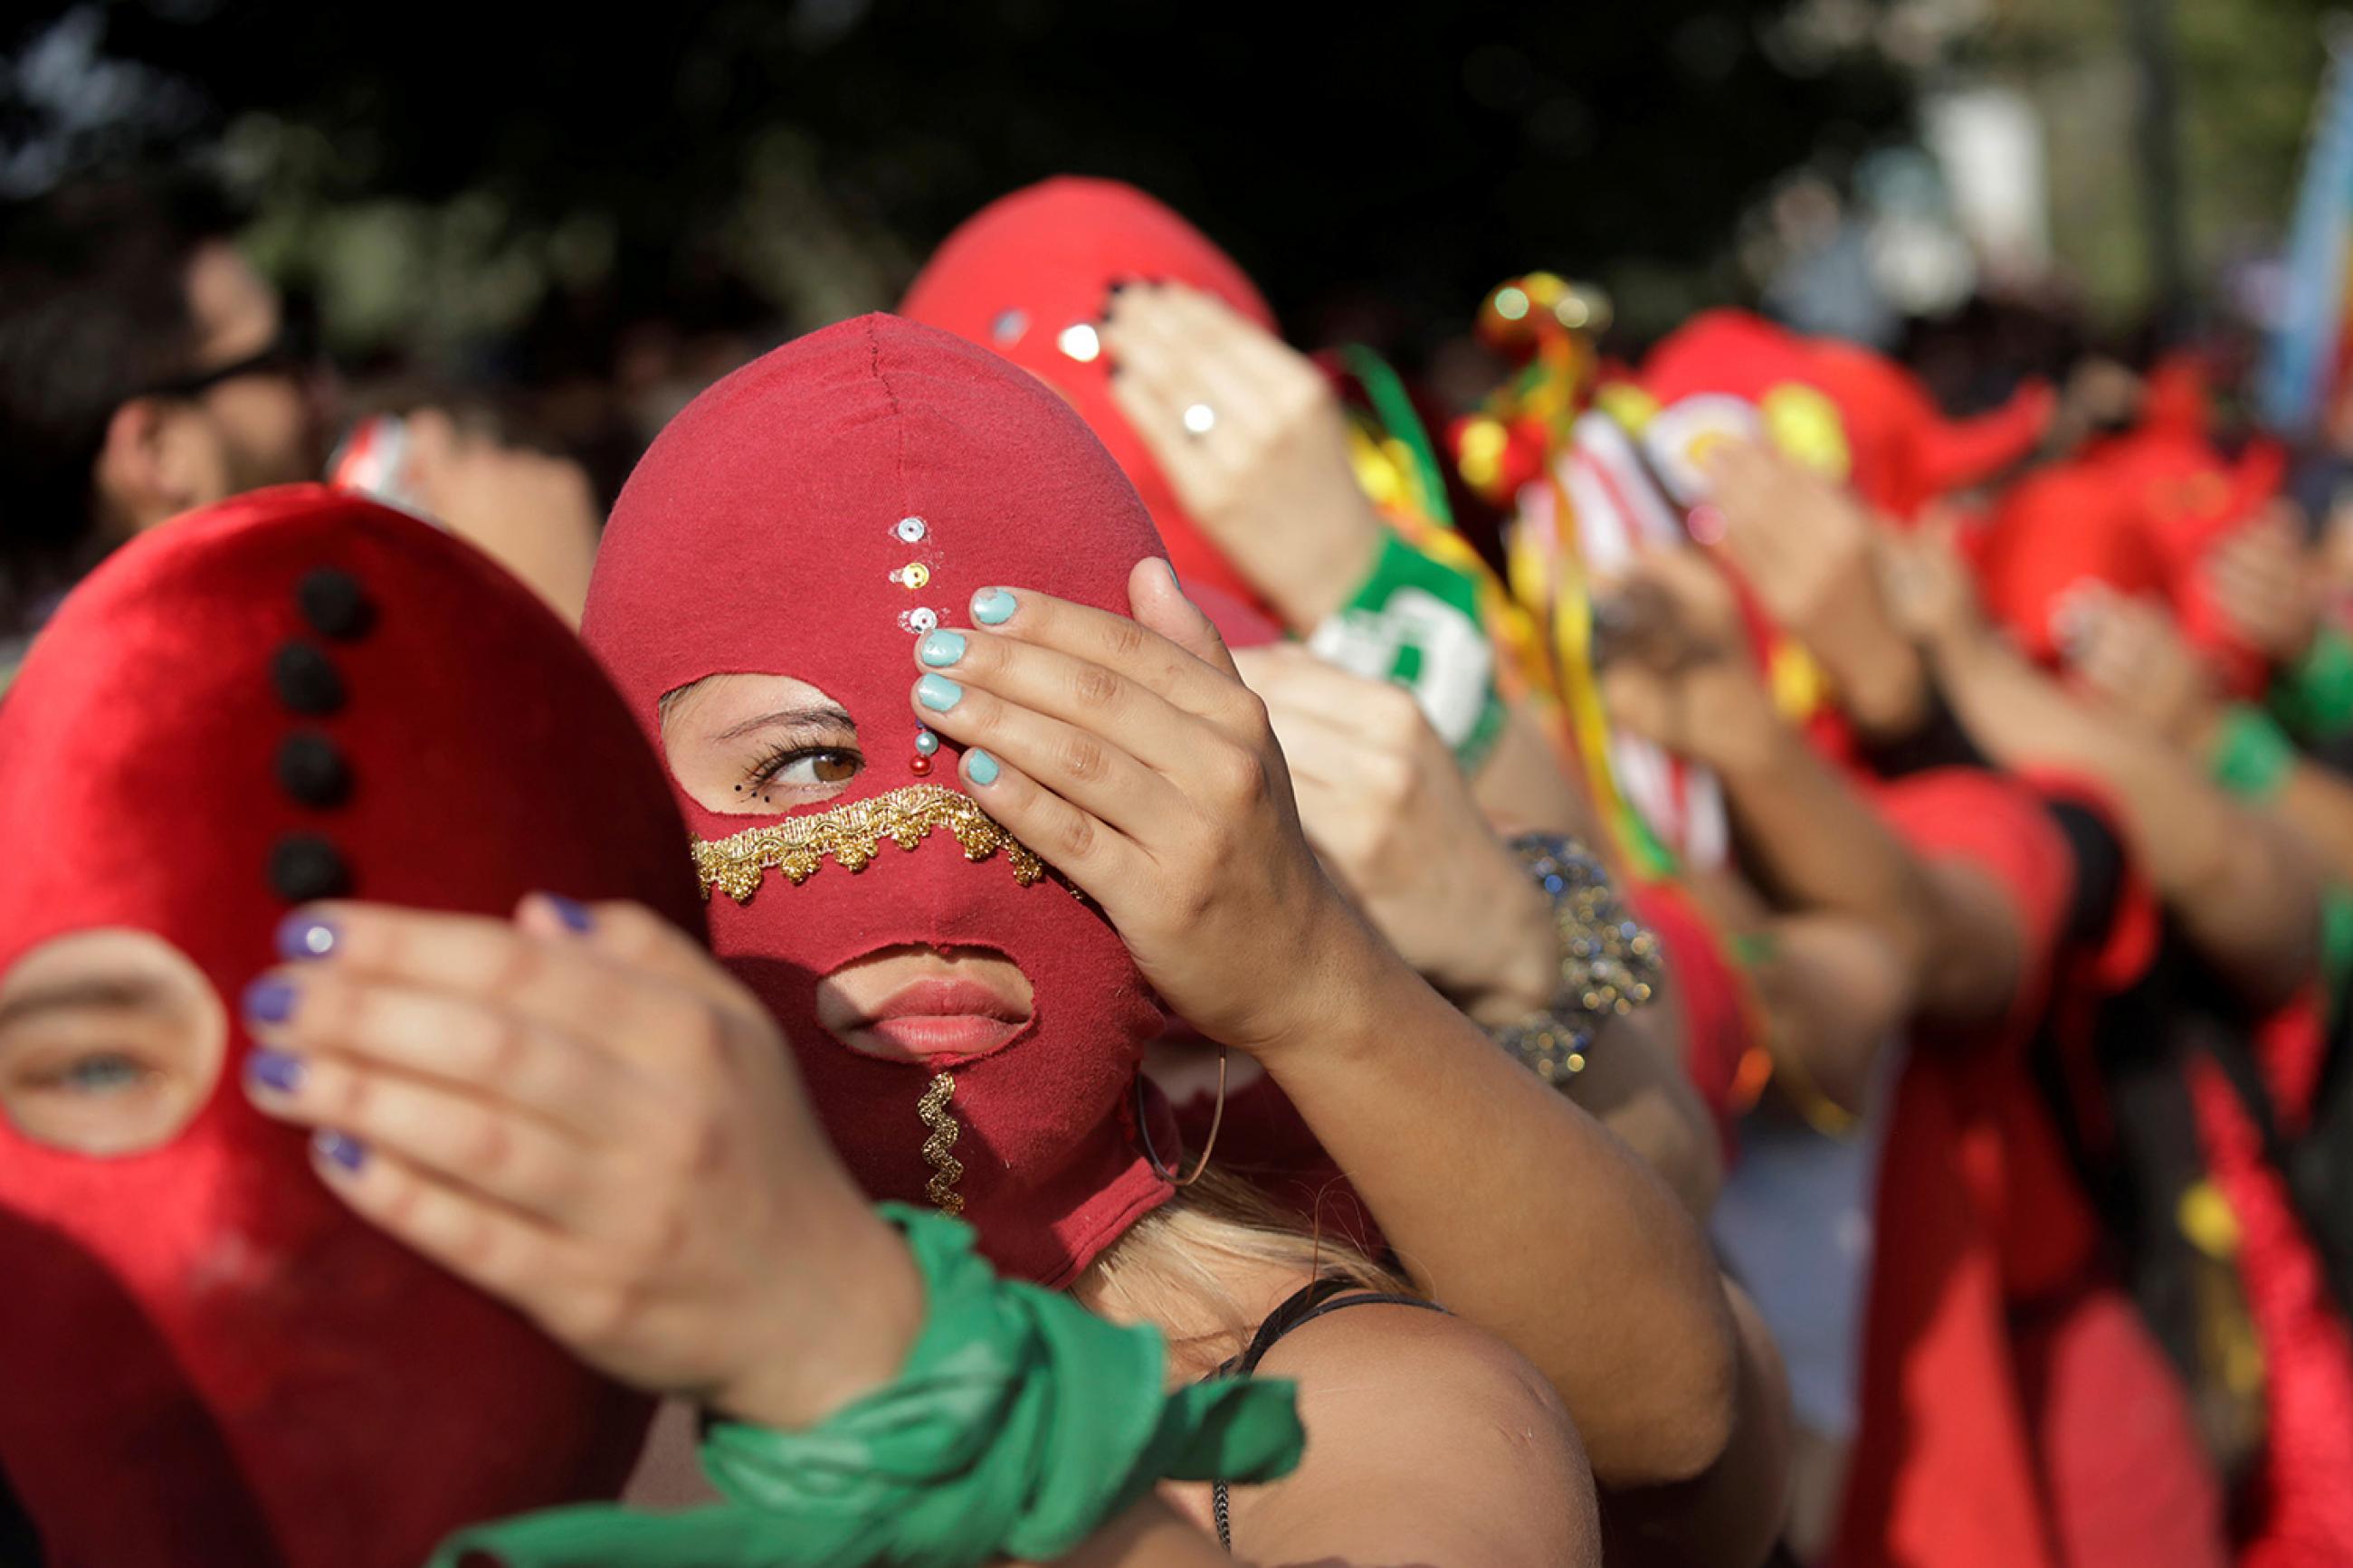 "We cannot afford to unsee domestic abuse after COVID-19," the authors write. Here women wearing masks take part in a protest against gender violence in Santiago, Chile, on December 6, 2019. The photo is a striking image of women wearing red masks lined up, each person holding a hand over one eye of the person in front of them. REUTERS/Andres Martinez Casares